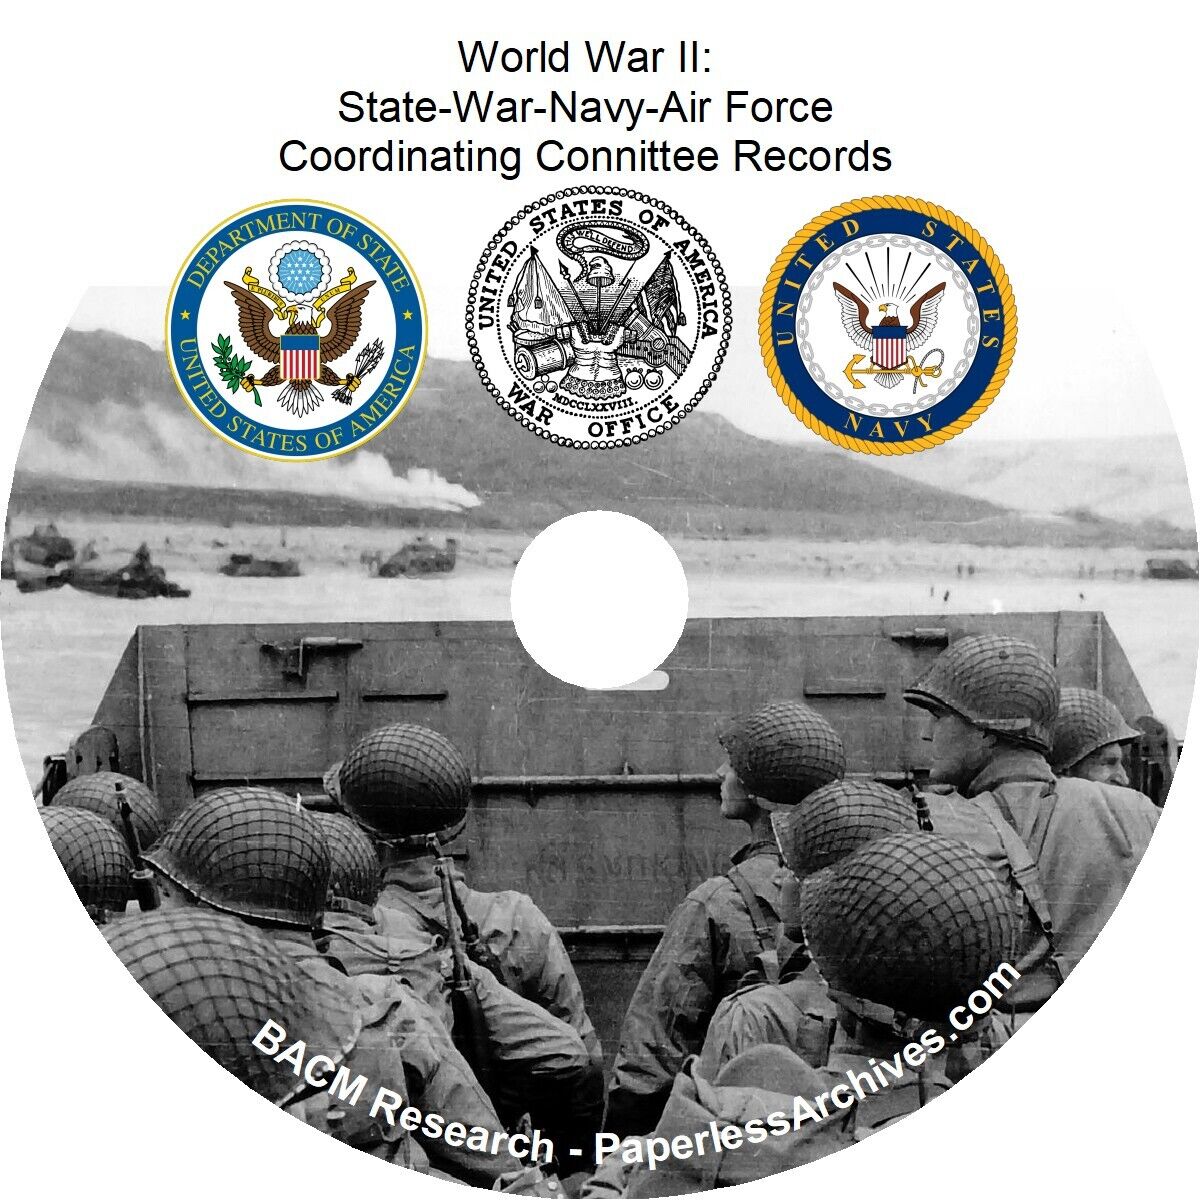 World War II: State-War-Navy-Air Force Coordinating Committee Records